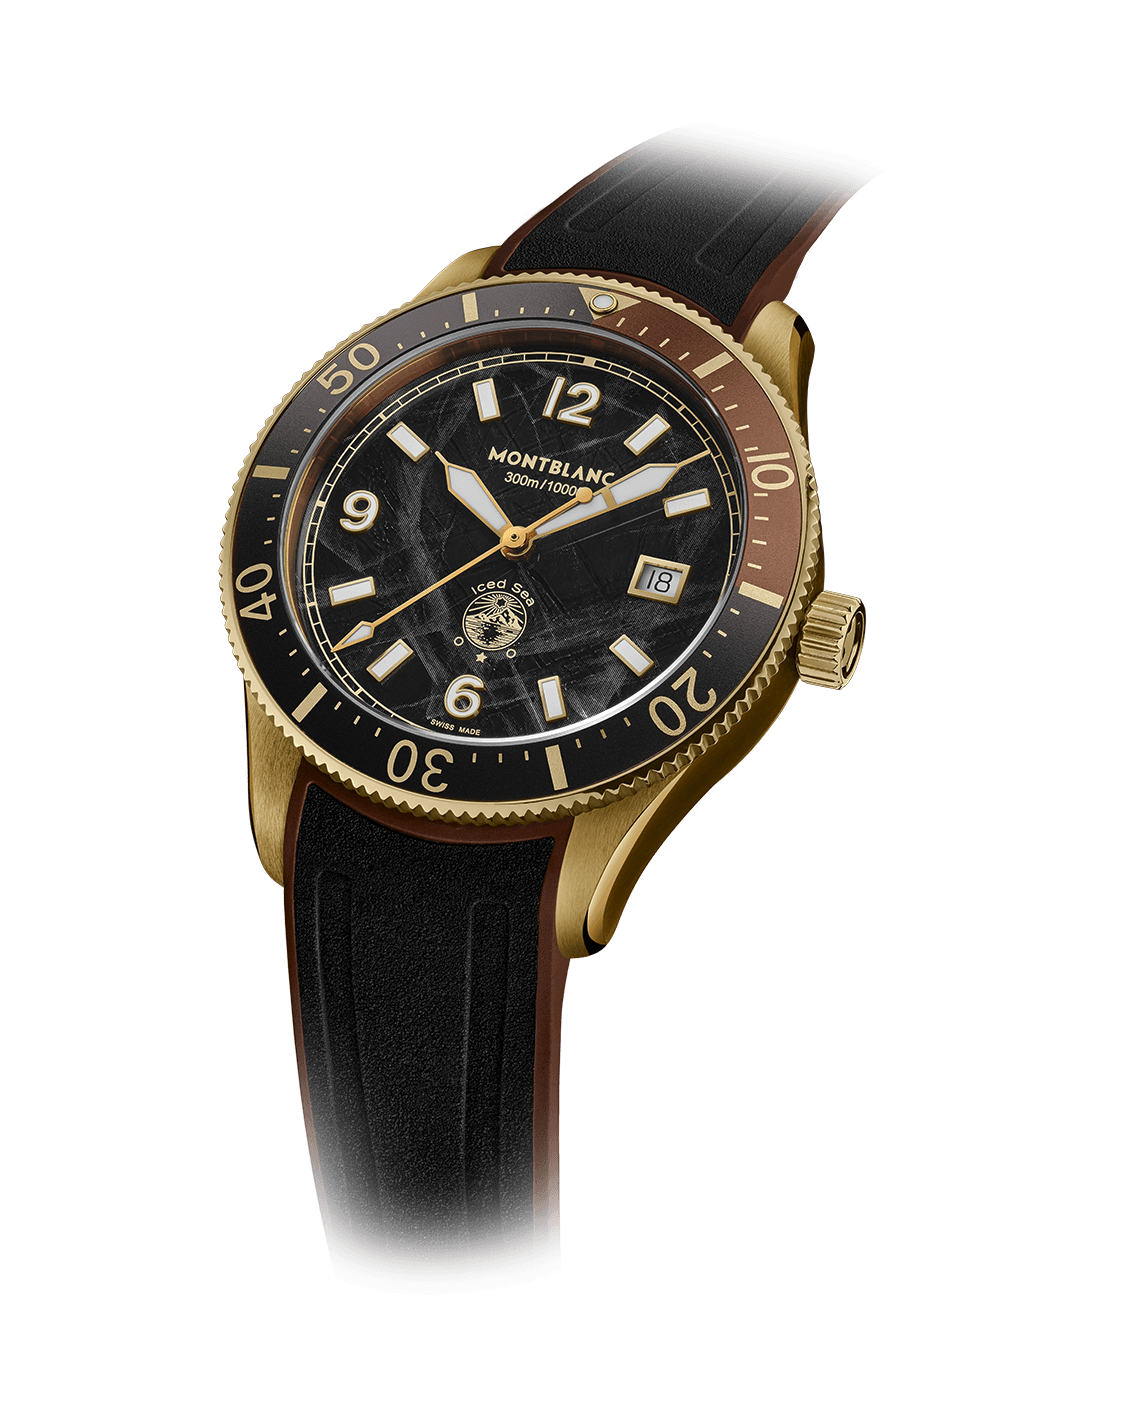  Montblanc Iced Sea Automatic Date Bronze-Tone